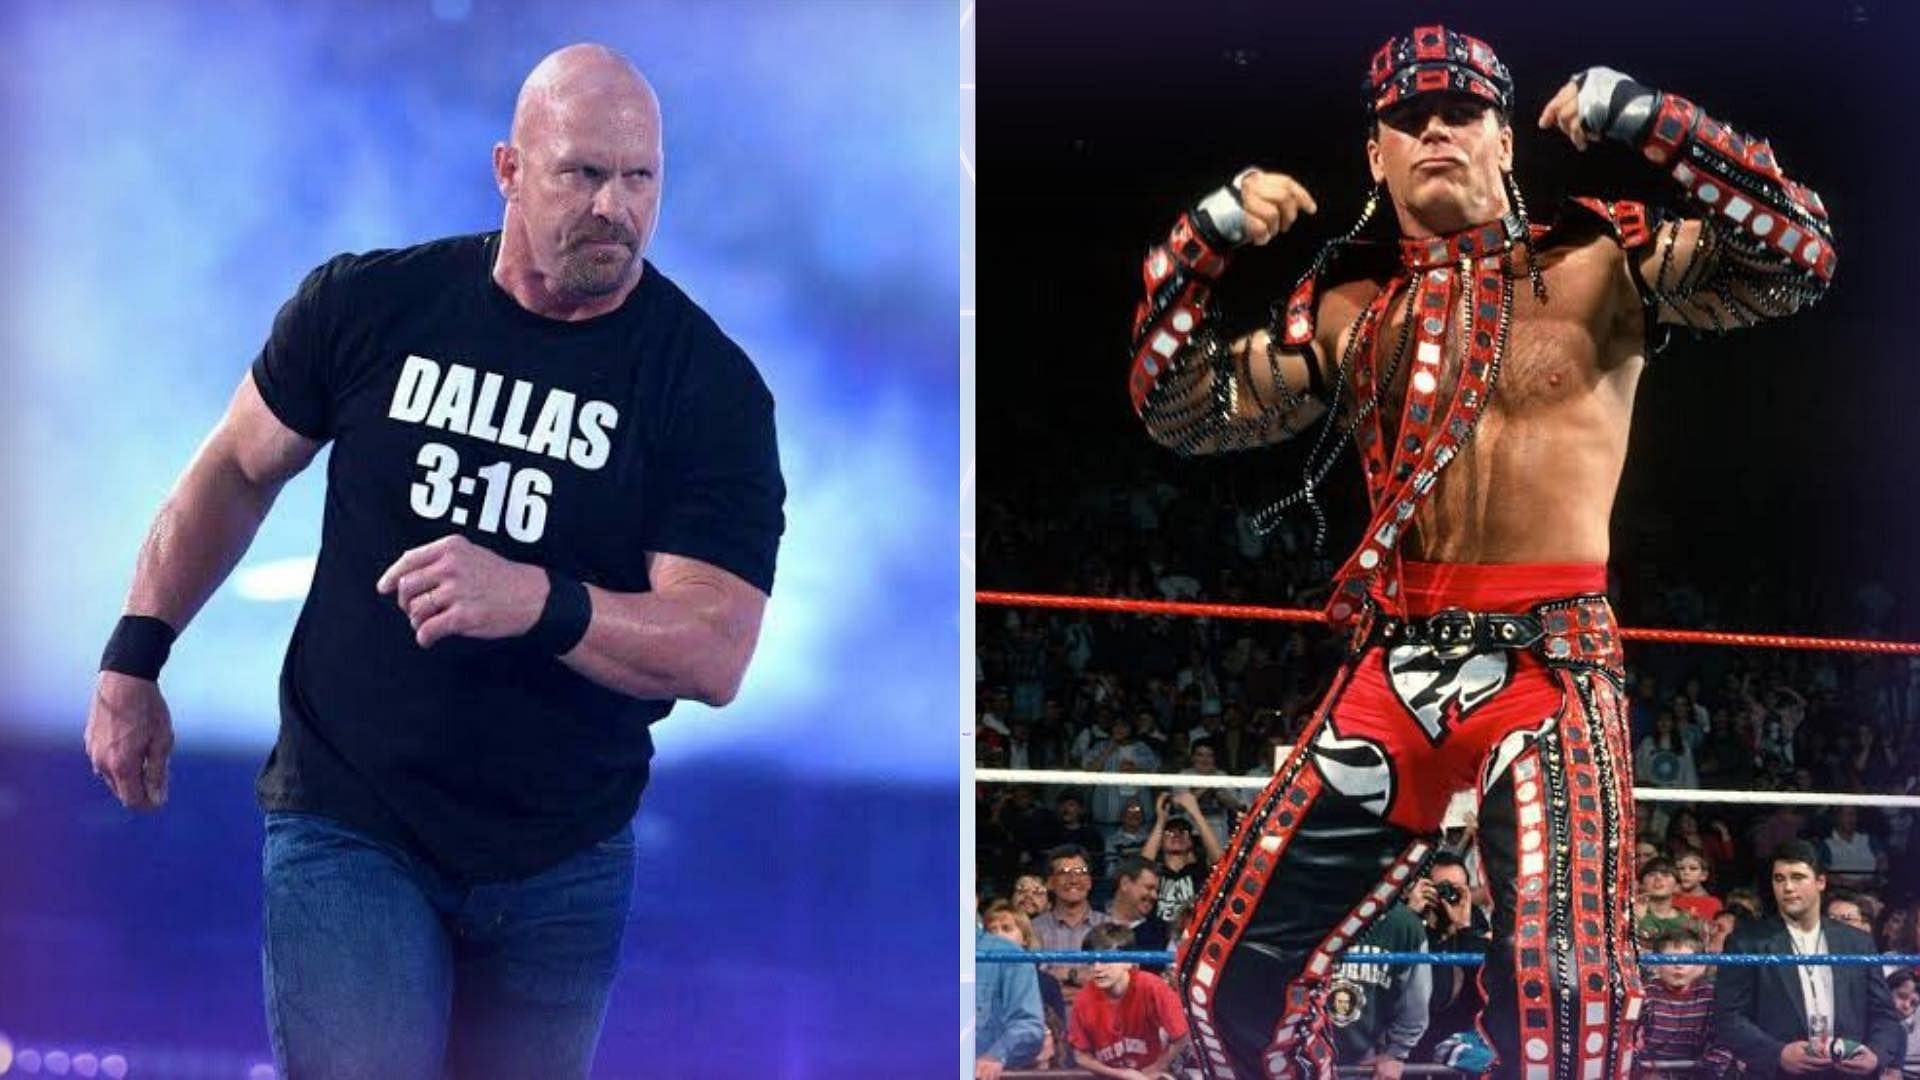 WWE Superstars and Hall of Famers Stone Cold Steve Austin and Shawn Michaels